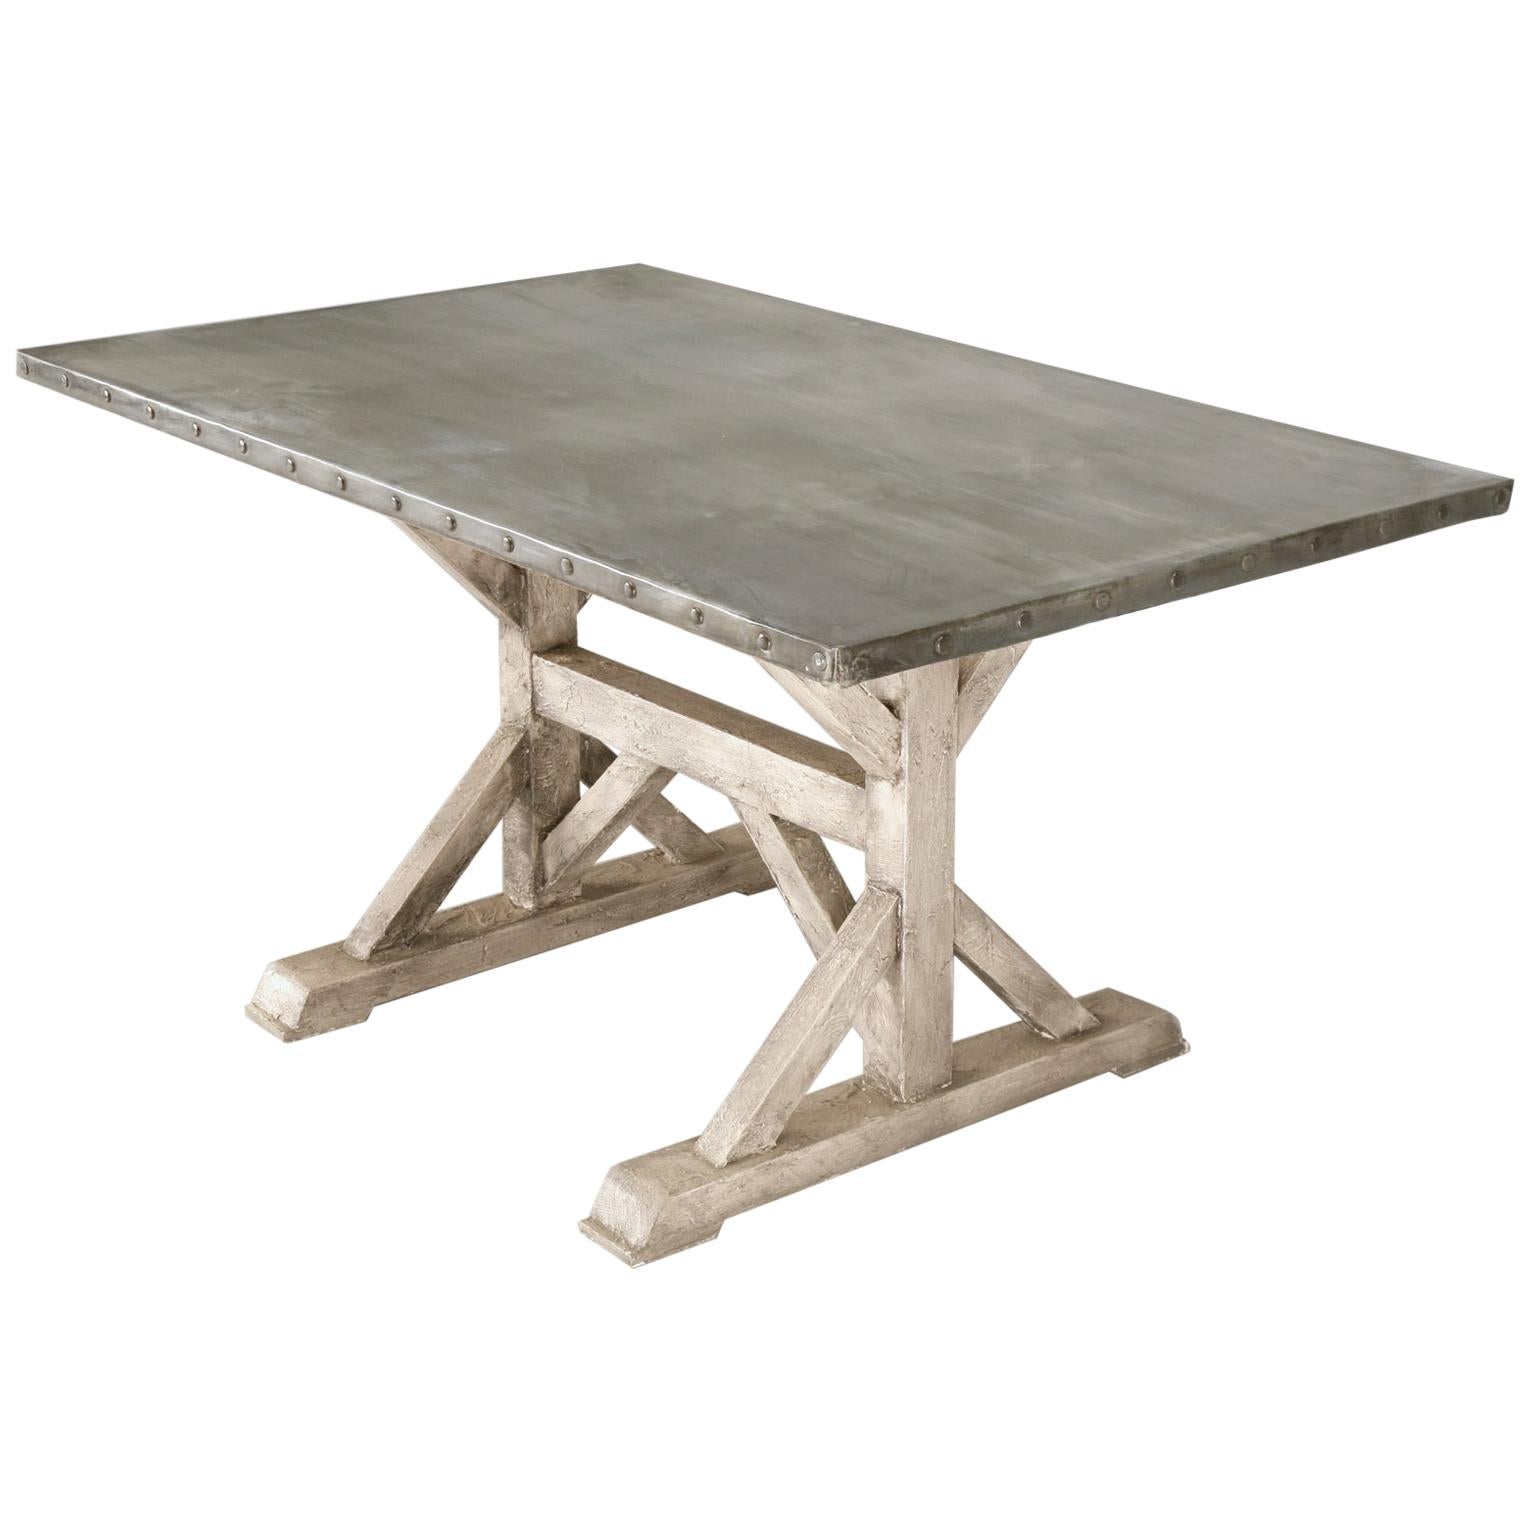 Aged Handmade Zinc Top Dining Table with Painted Base in Any Dimension